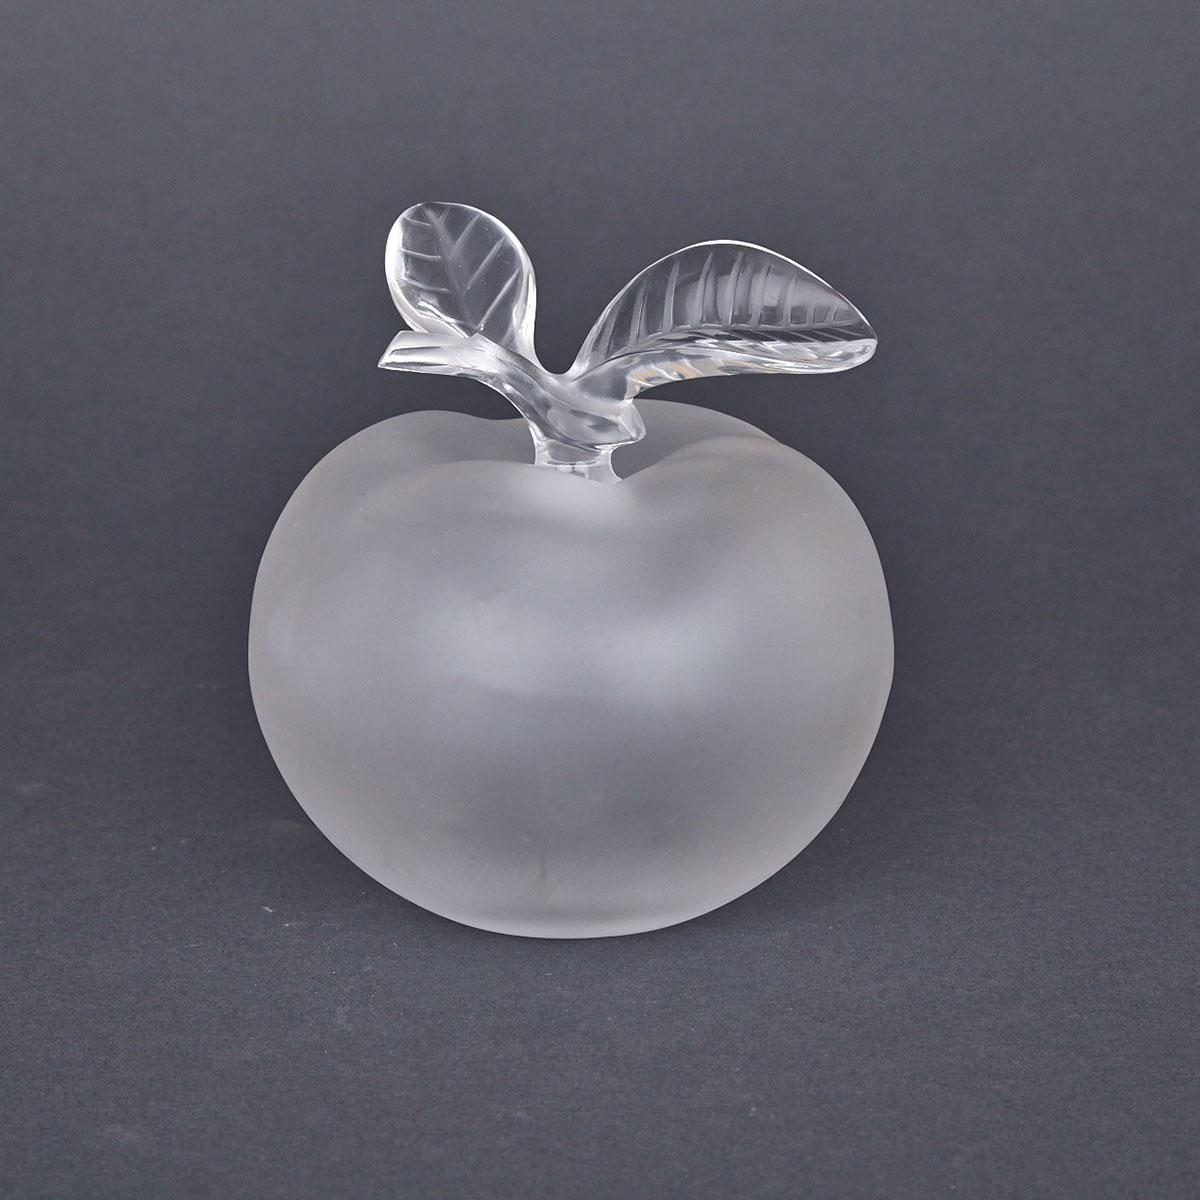 ‘Fille d’Eve’, Lalique Moulded and Frosted Glass Large Perfume Bottle, for Nina Ricci, post-1945